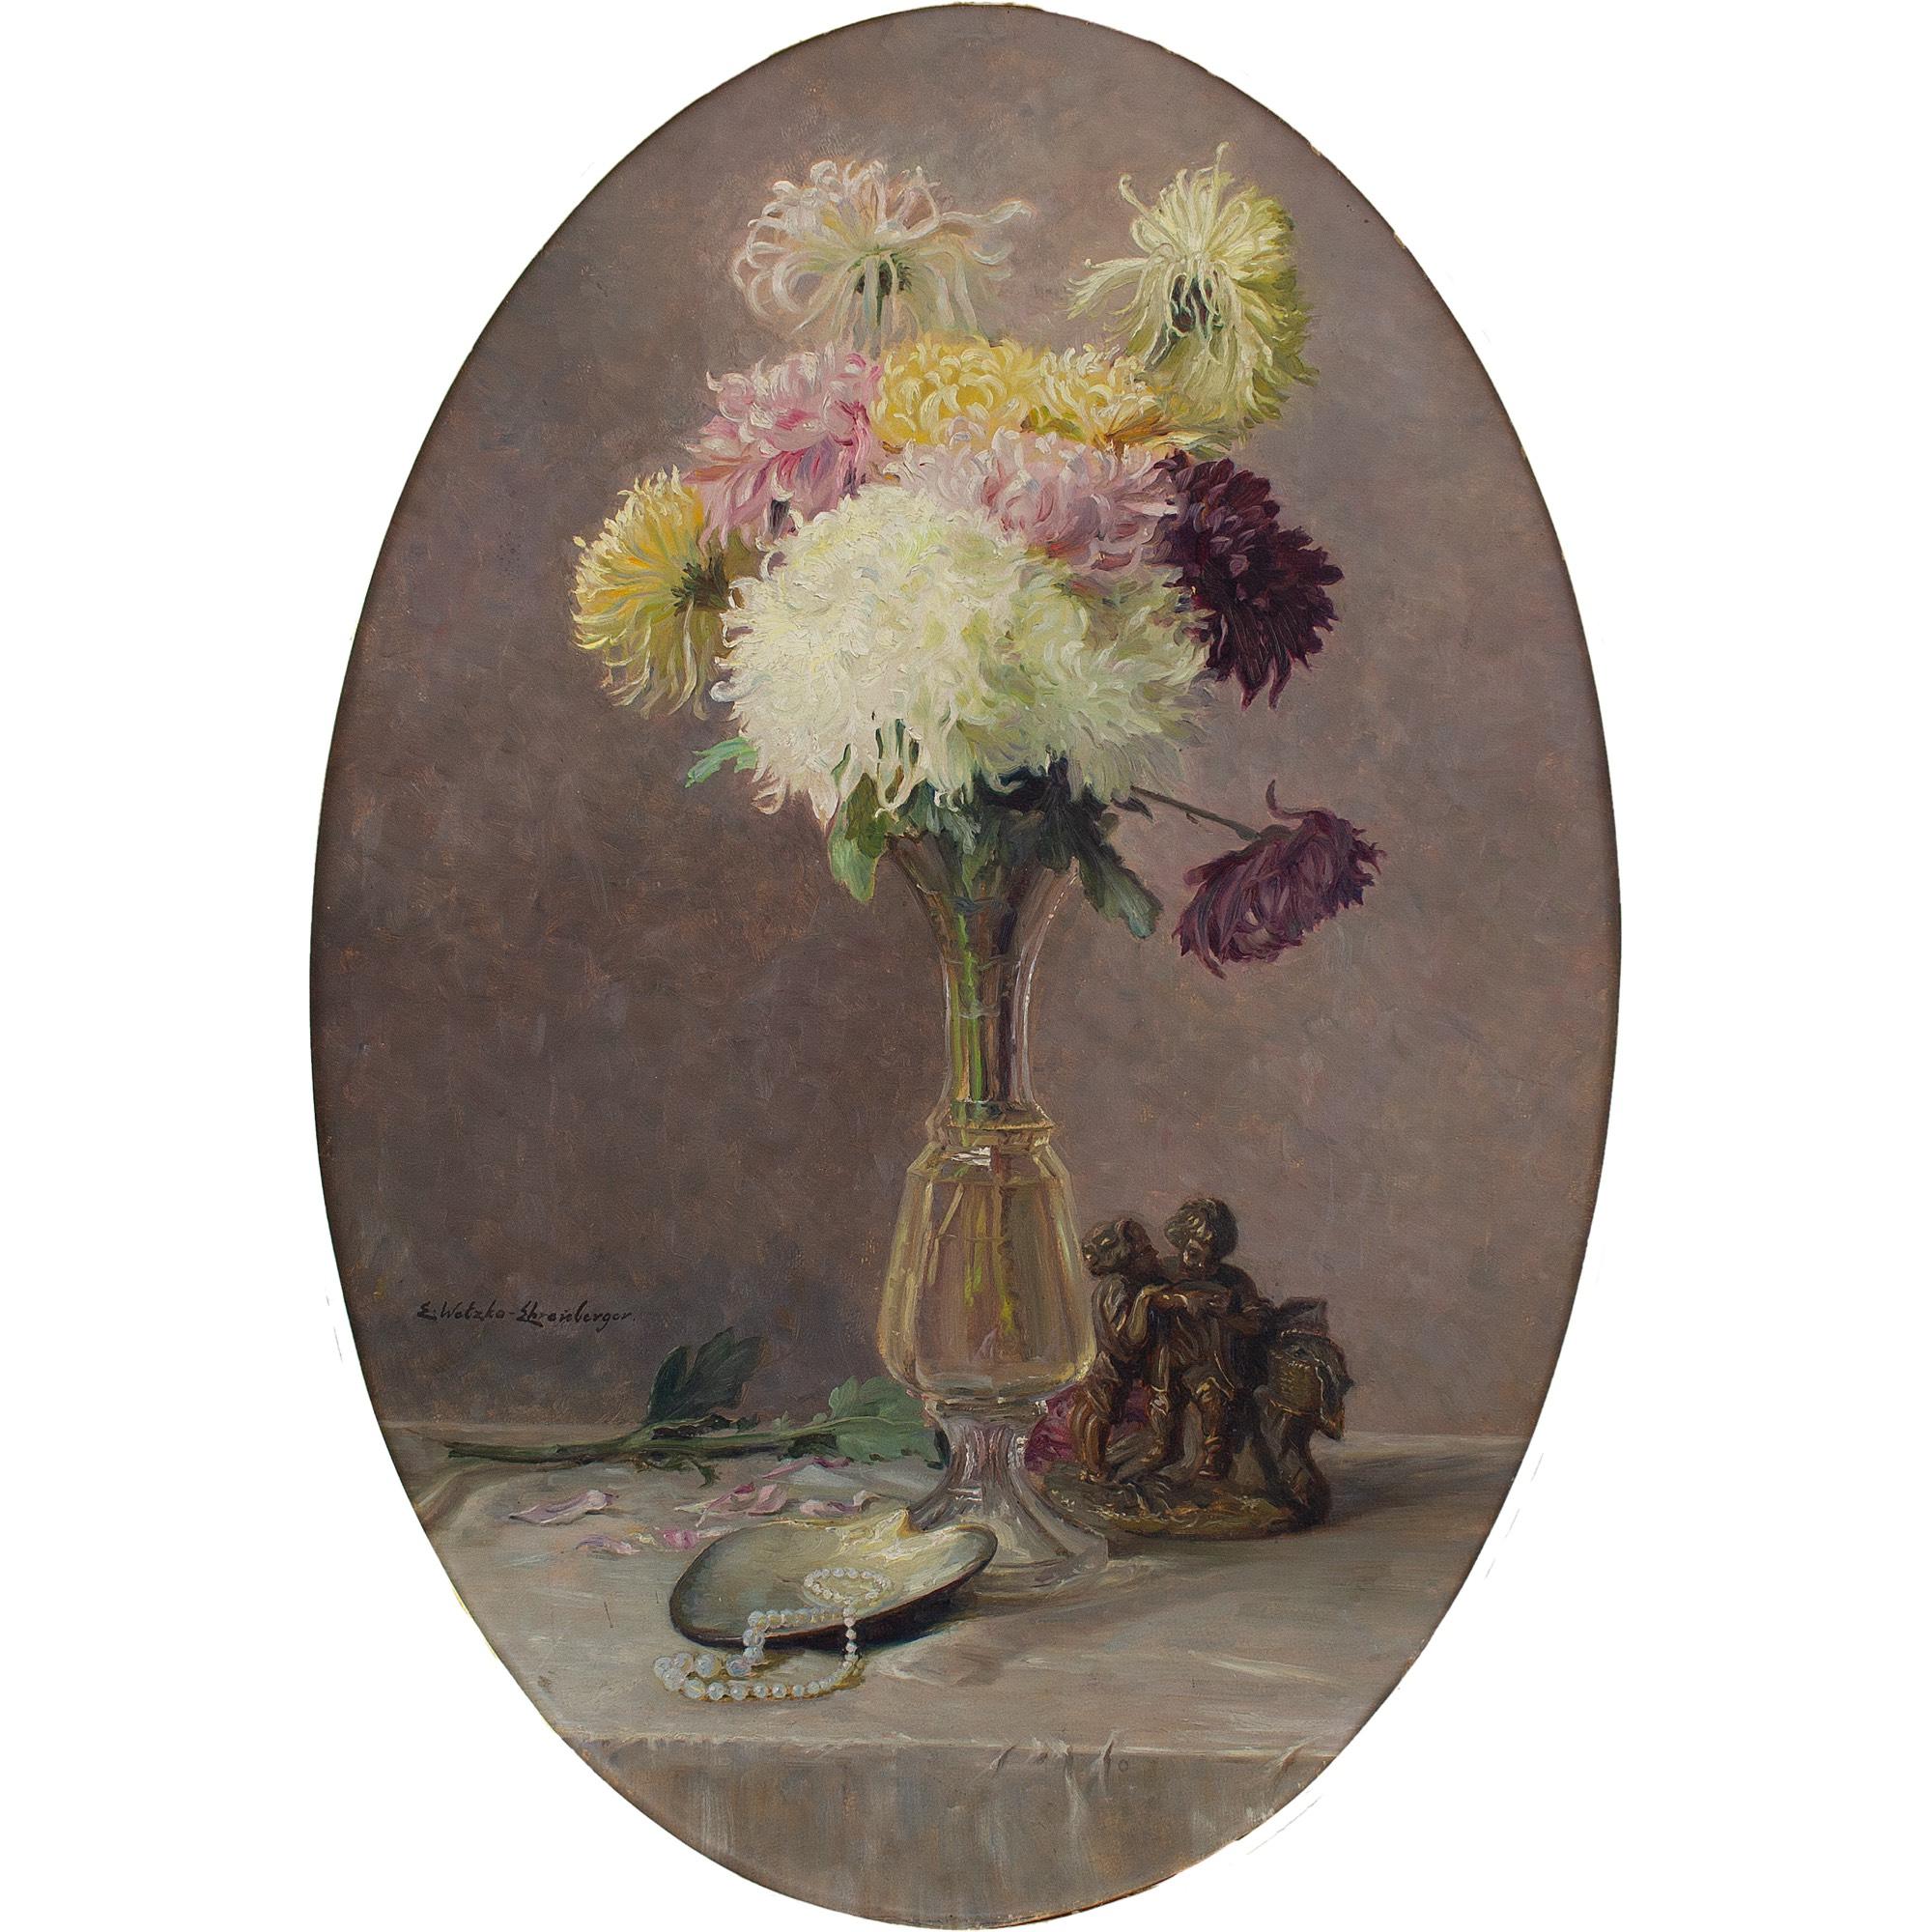 This enchanting still life by Austrian artist, Ella Wetzko-Ehrenberger (1874-1945), depicts an arrangement of chrysanthemums, oyster shell, statuette and pearl necklace. It’s a refined snapshot into the life of a sophisticated woman.

There’s a